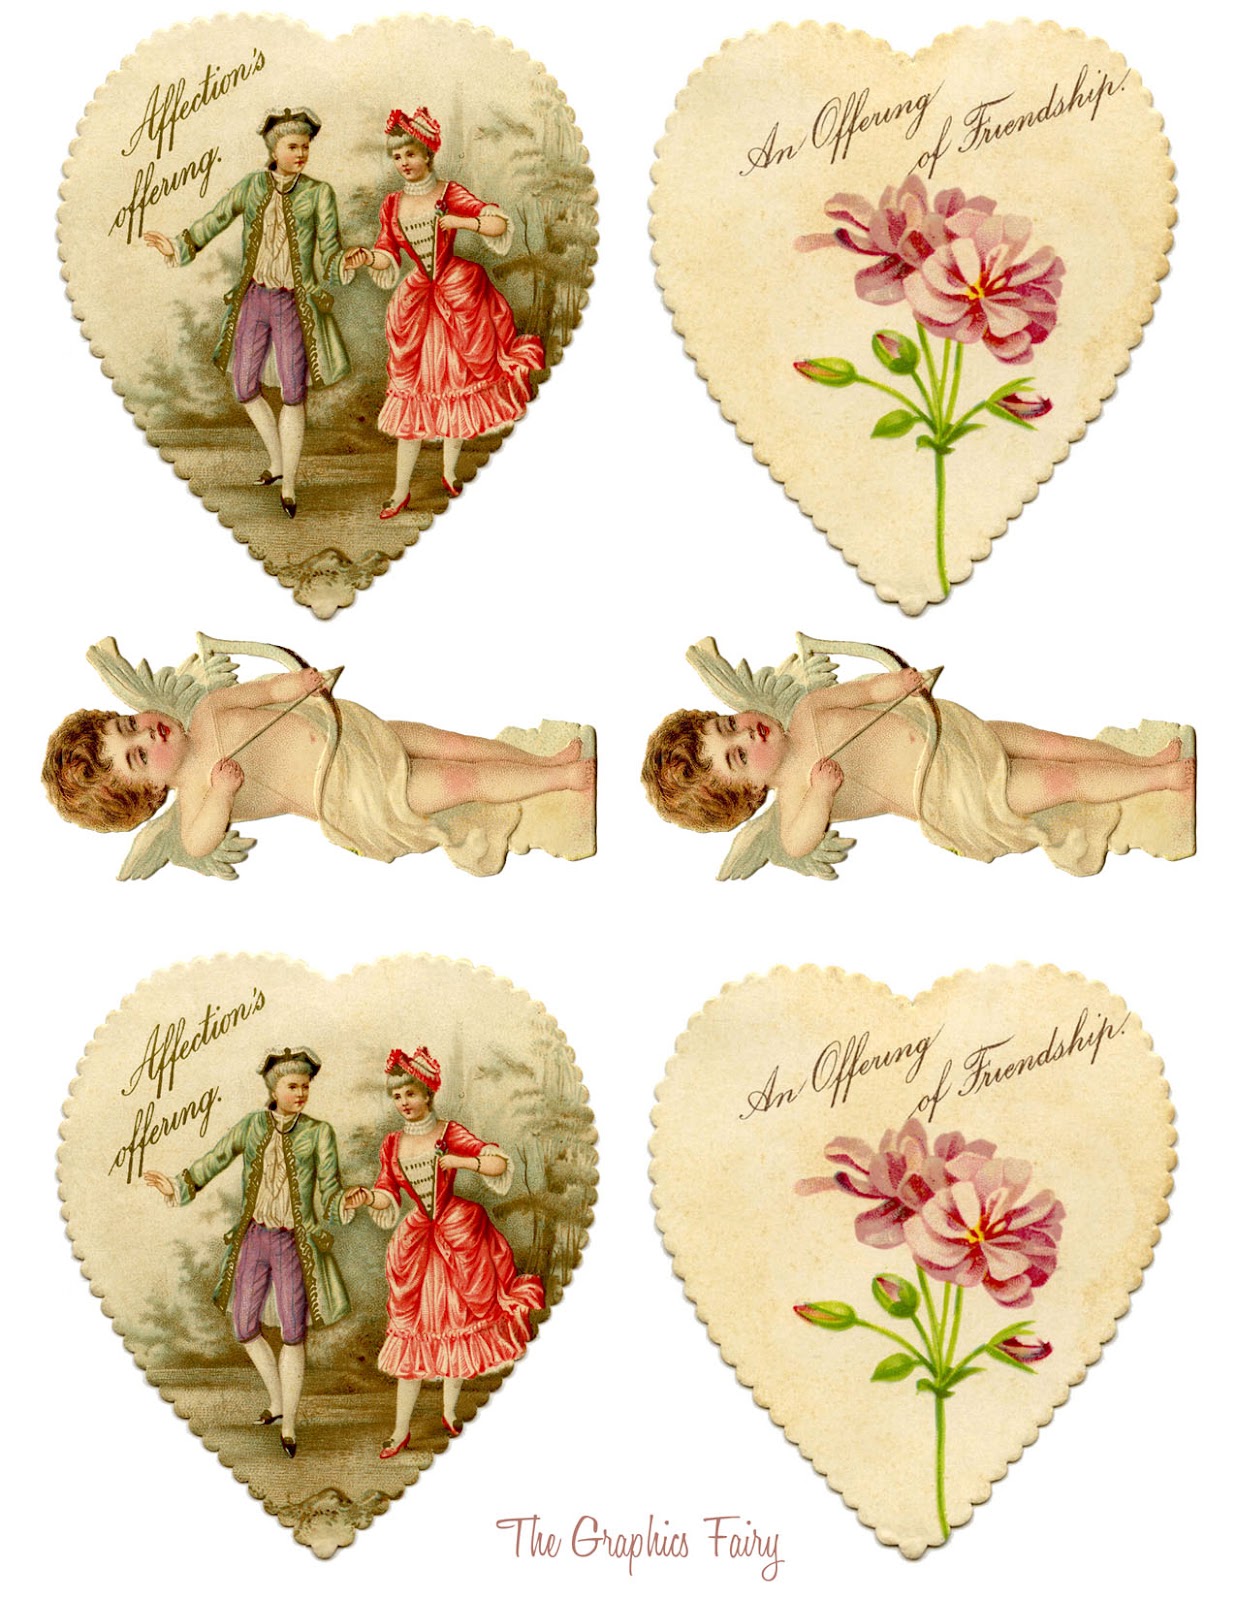 Vintage Valentine Printable - Heart Garland with Cupids - The Graphics Fairy1236 x 1600